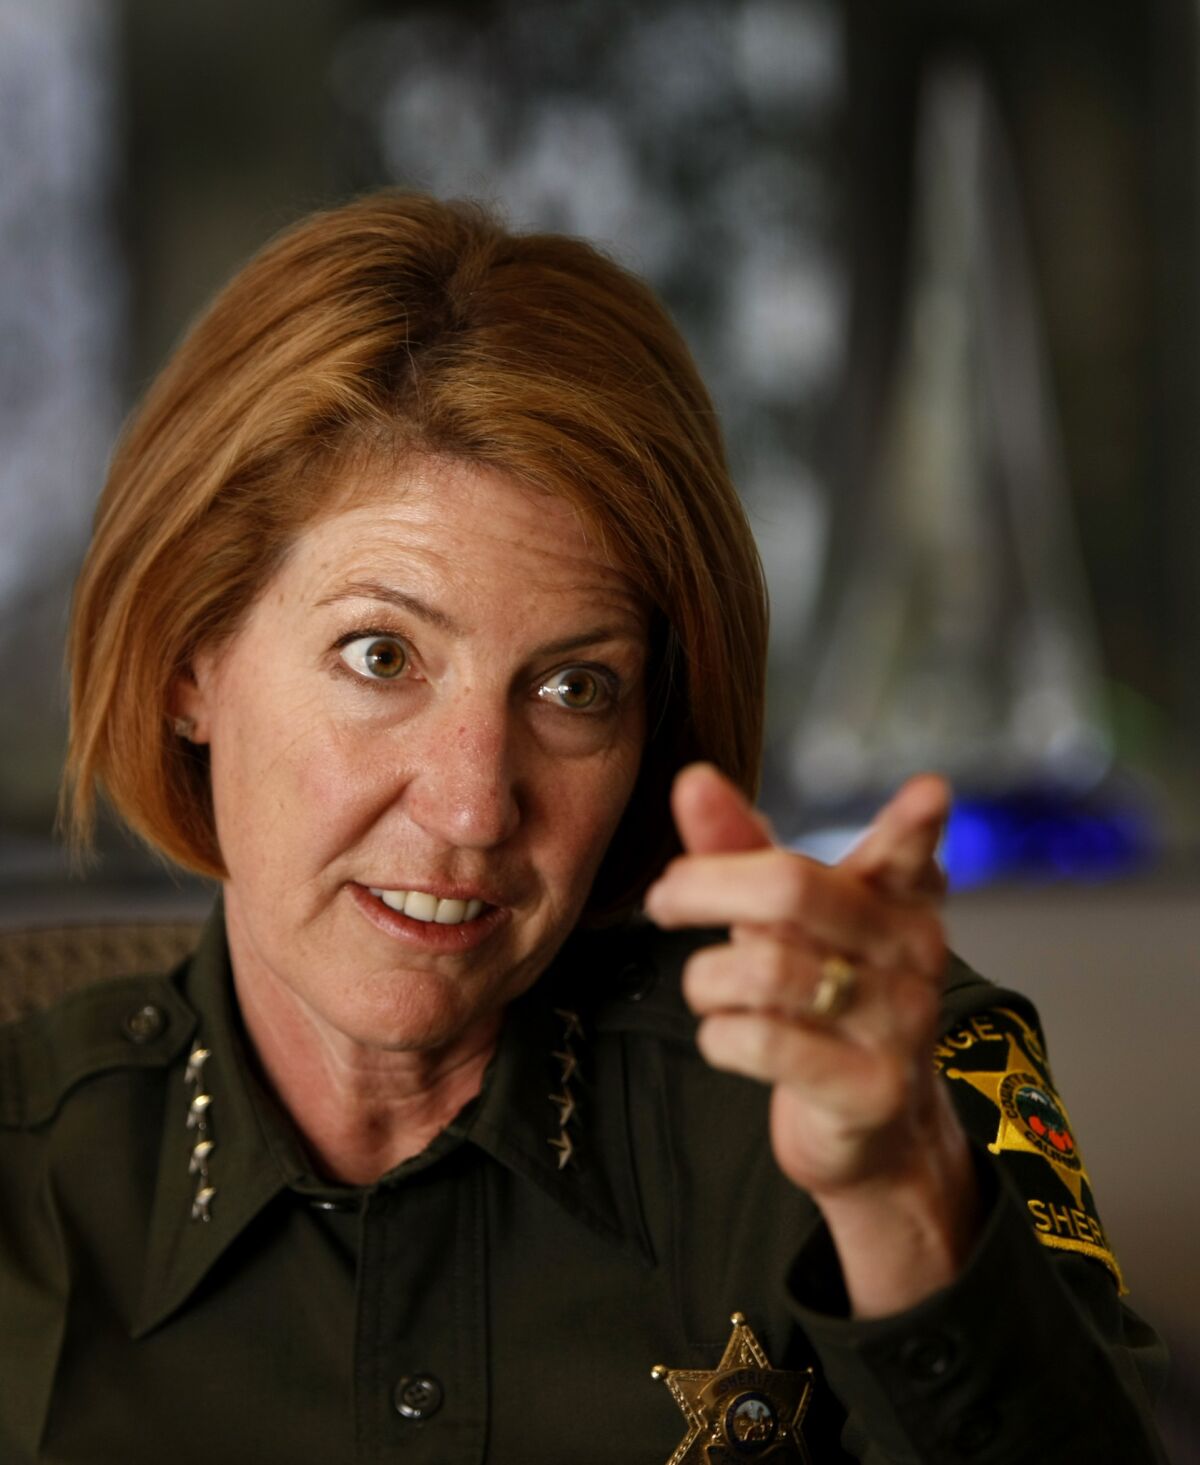 Orange County Sheriff Sandra Hutchens told supervisors that her department plans to follow the law as it now exists, though she said applicants are being encouraged to submit a statement of "good cause" given the uncertainties.